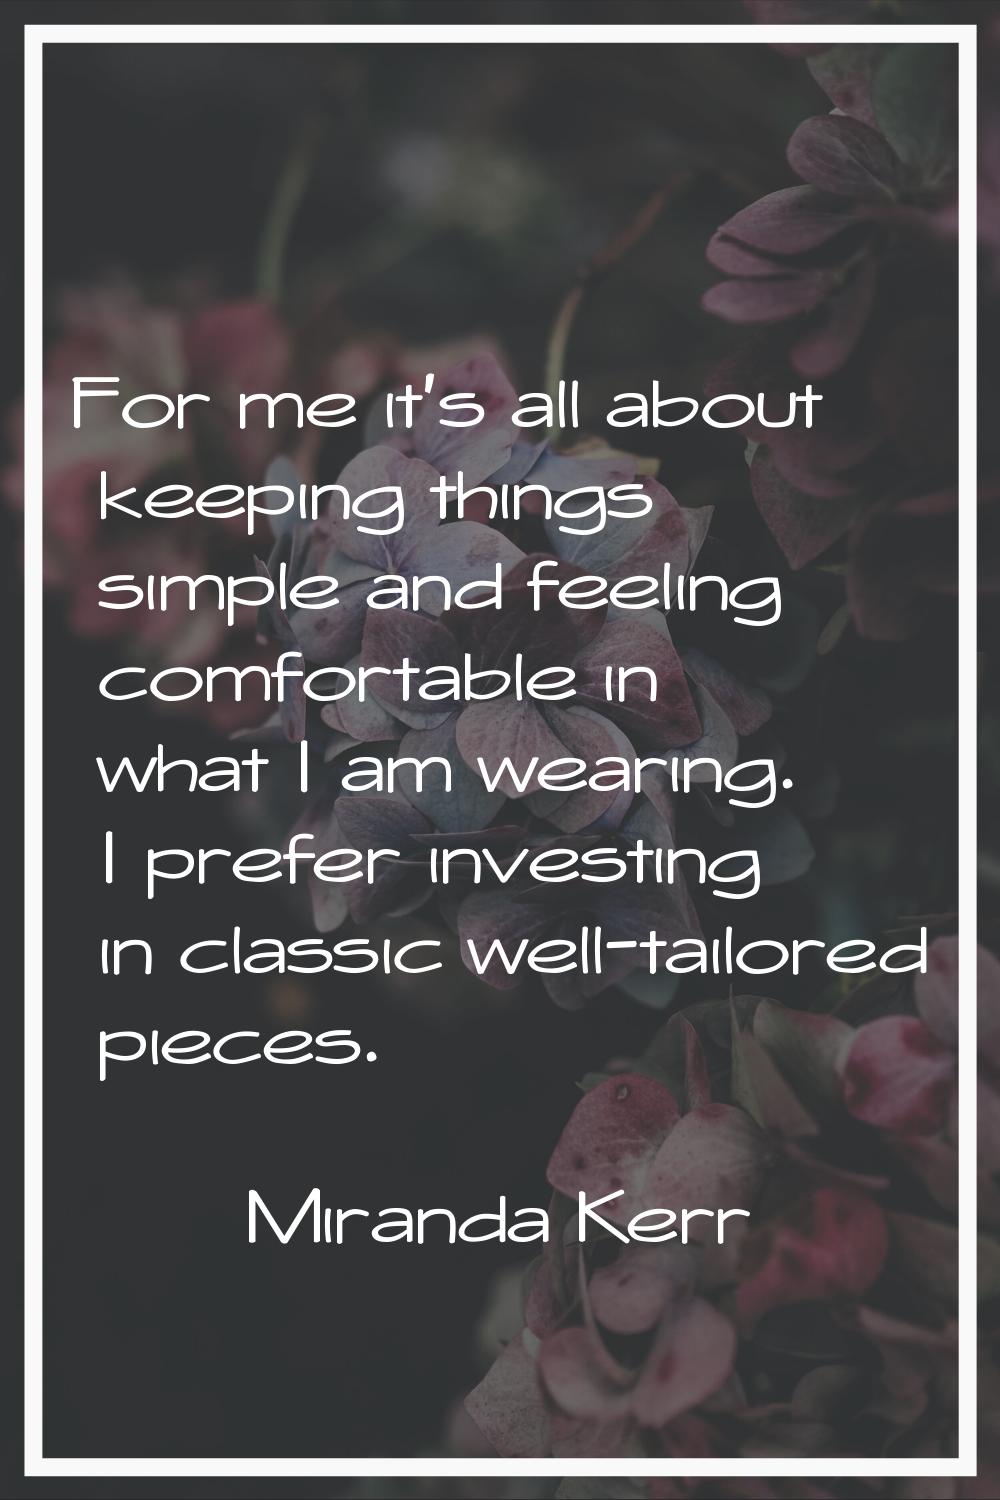 For me it's all about keeping things simple and feeling comfortable in what I am wearing. I prefer 